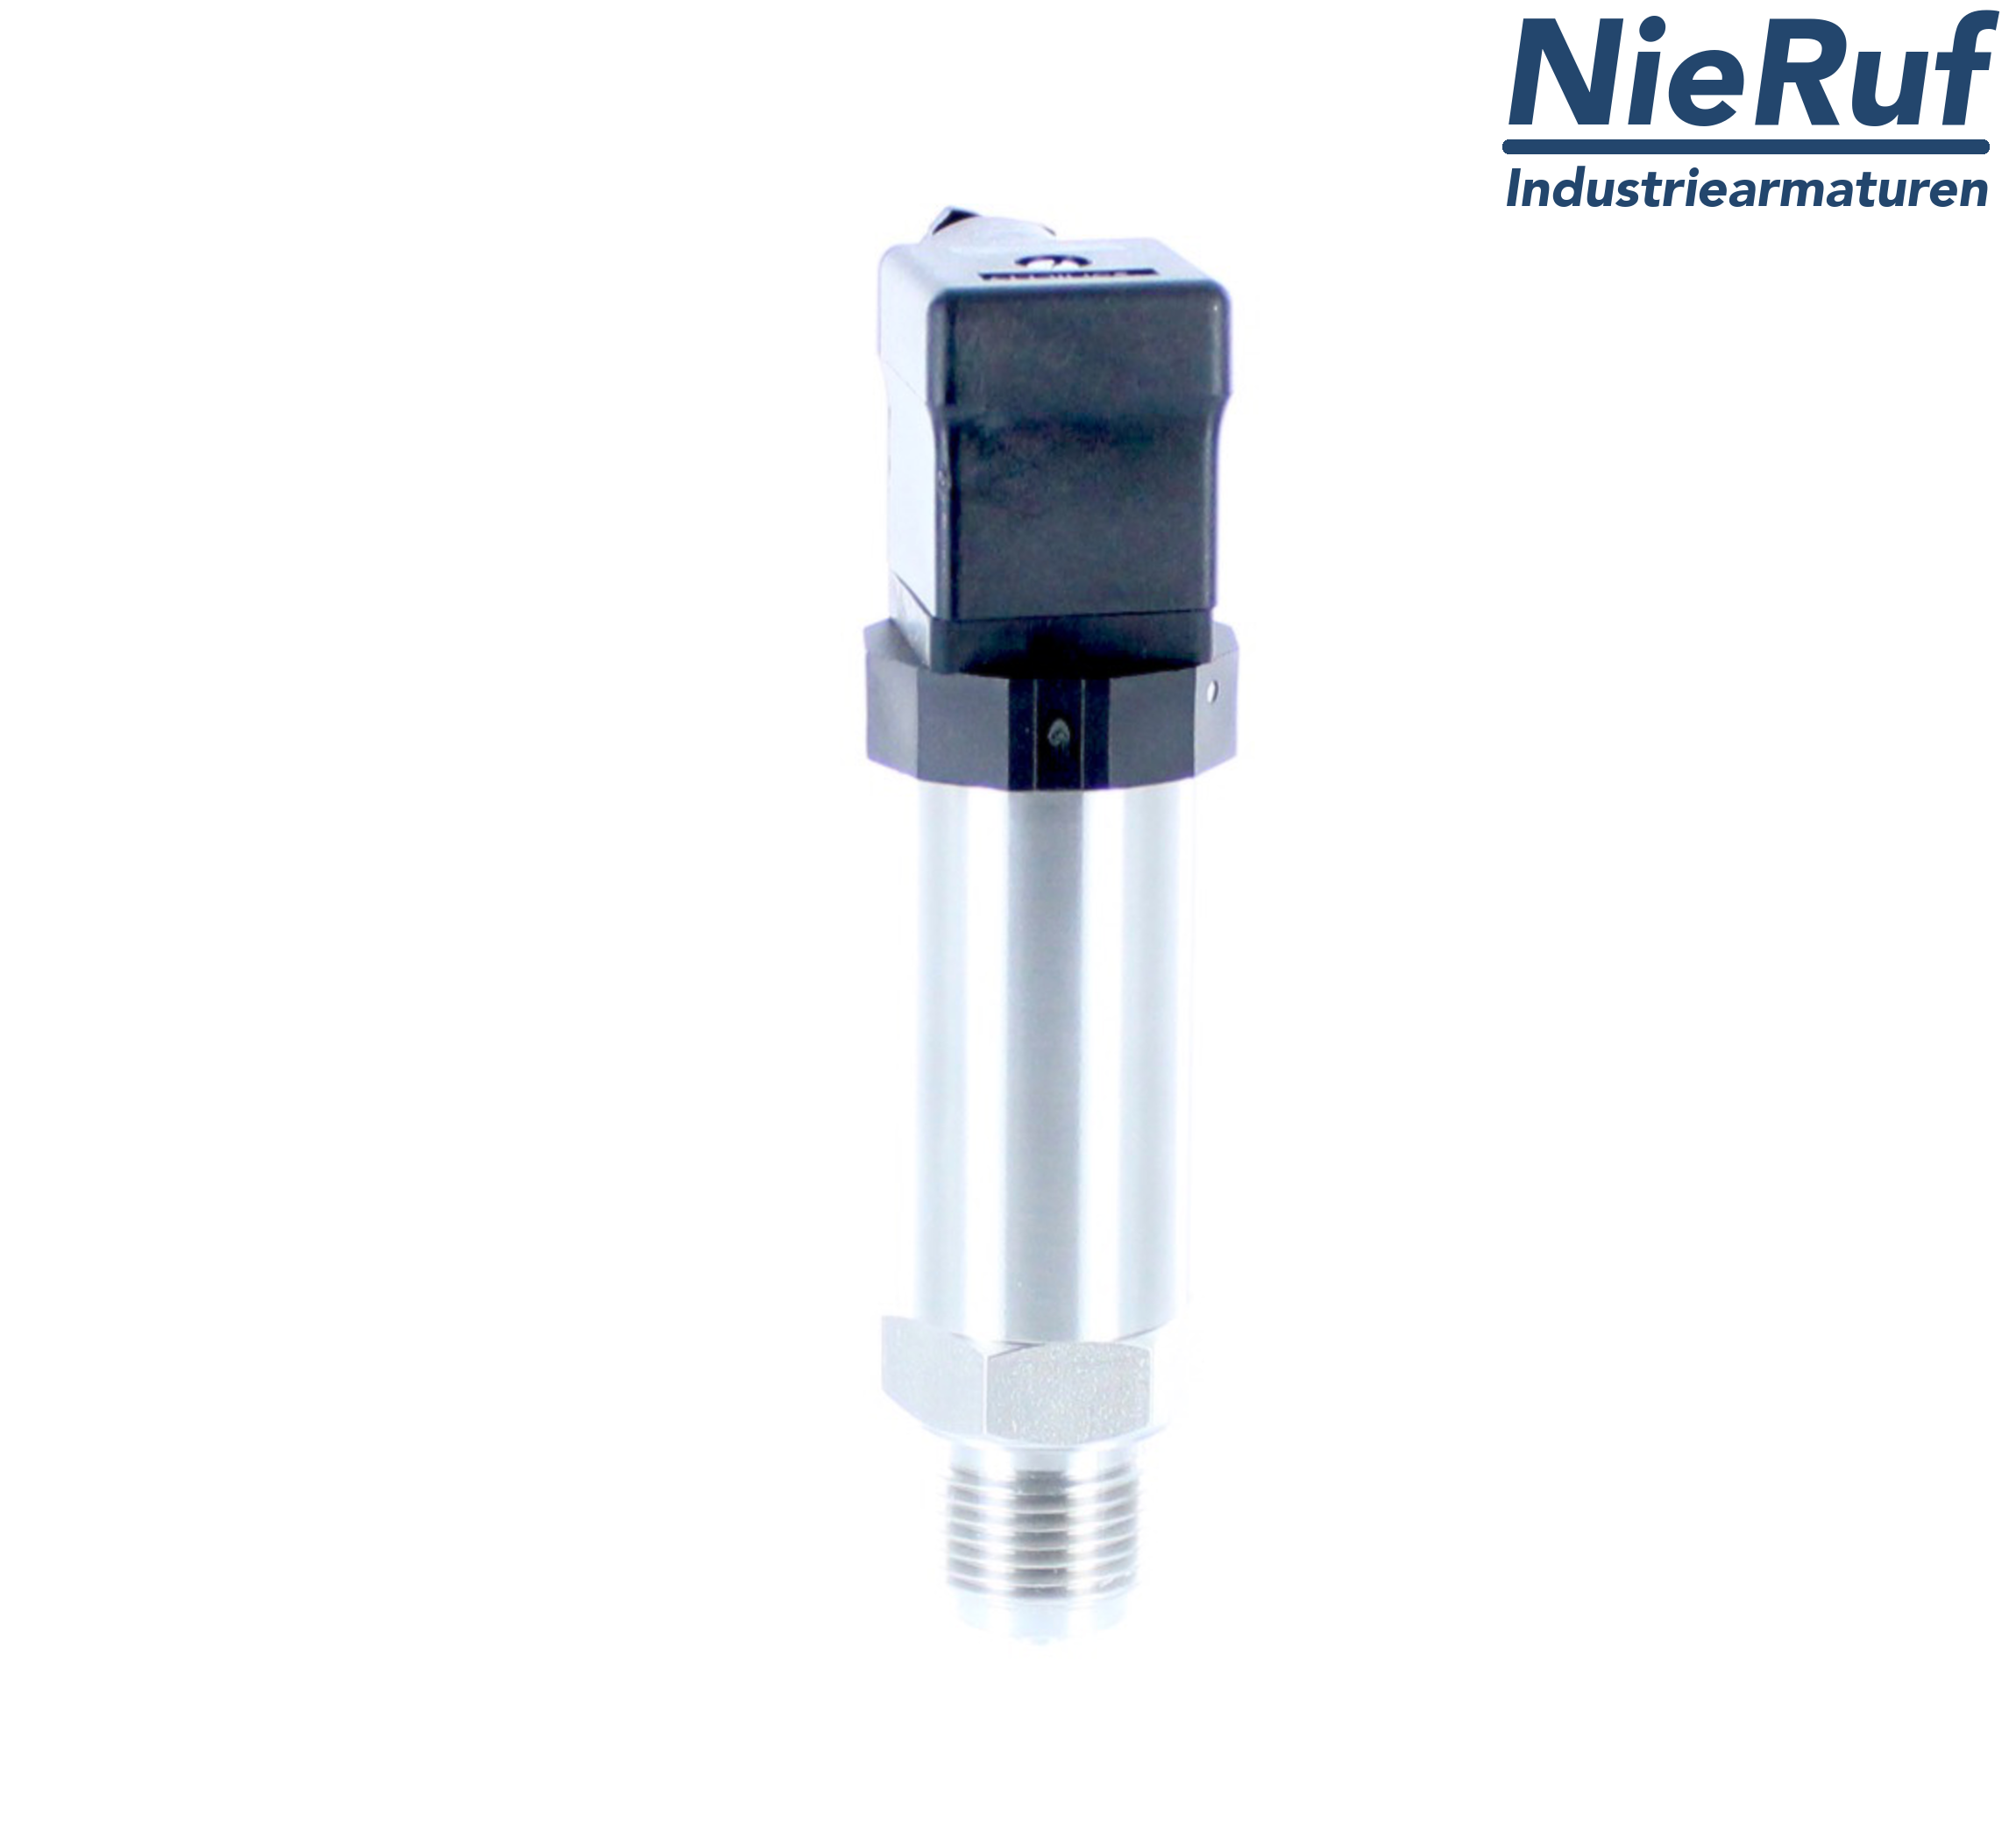 pressure sensor G 1/4" B DS01 stainless steel 2-wire: 4-20mA FPM 0,0 - 160,0 bar